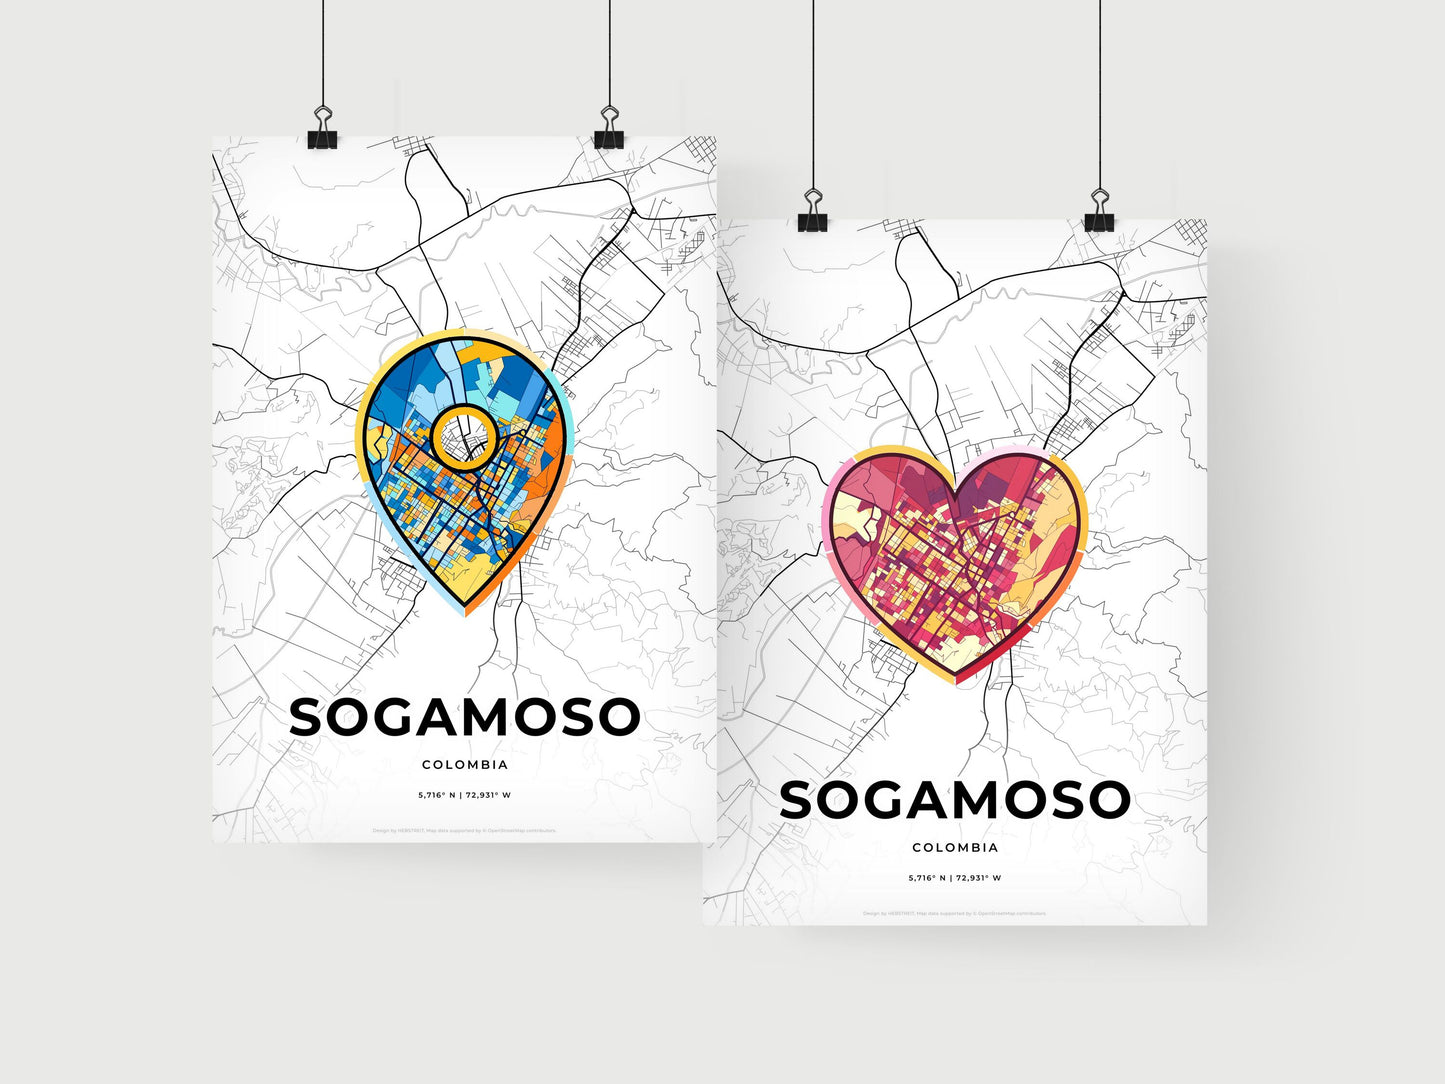 SOGAMOSO COLOMBIA minimal art map with a colorful icon.